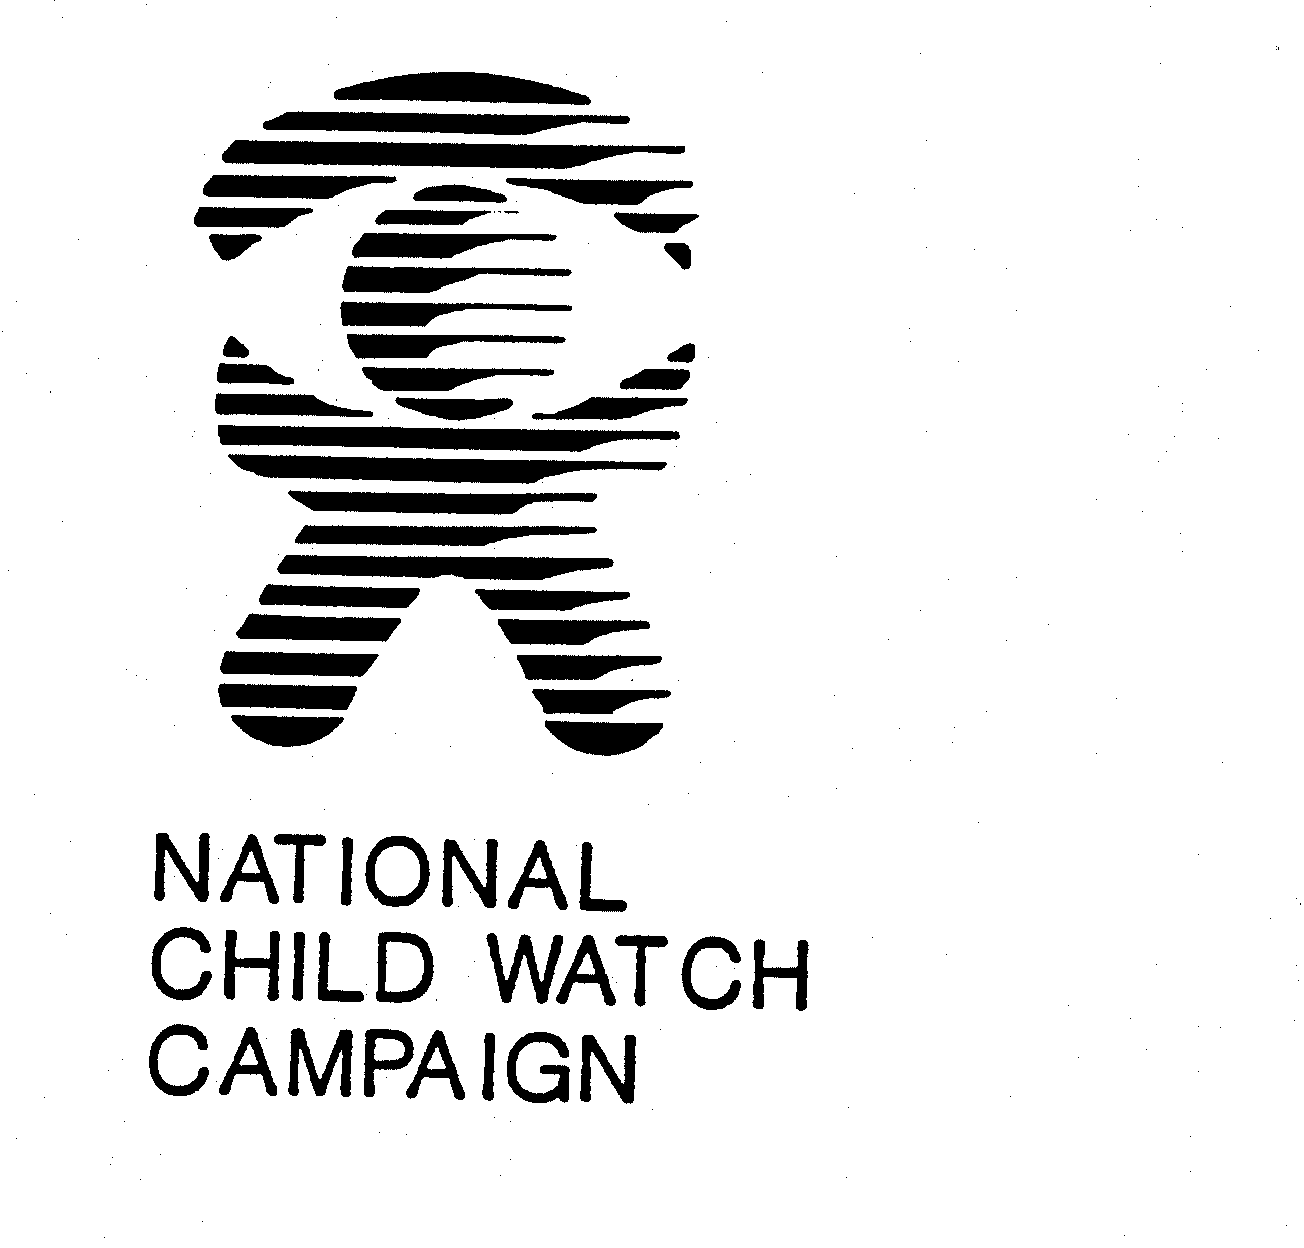  NATIONAL CHILD WATCH CAMPAIGN